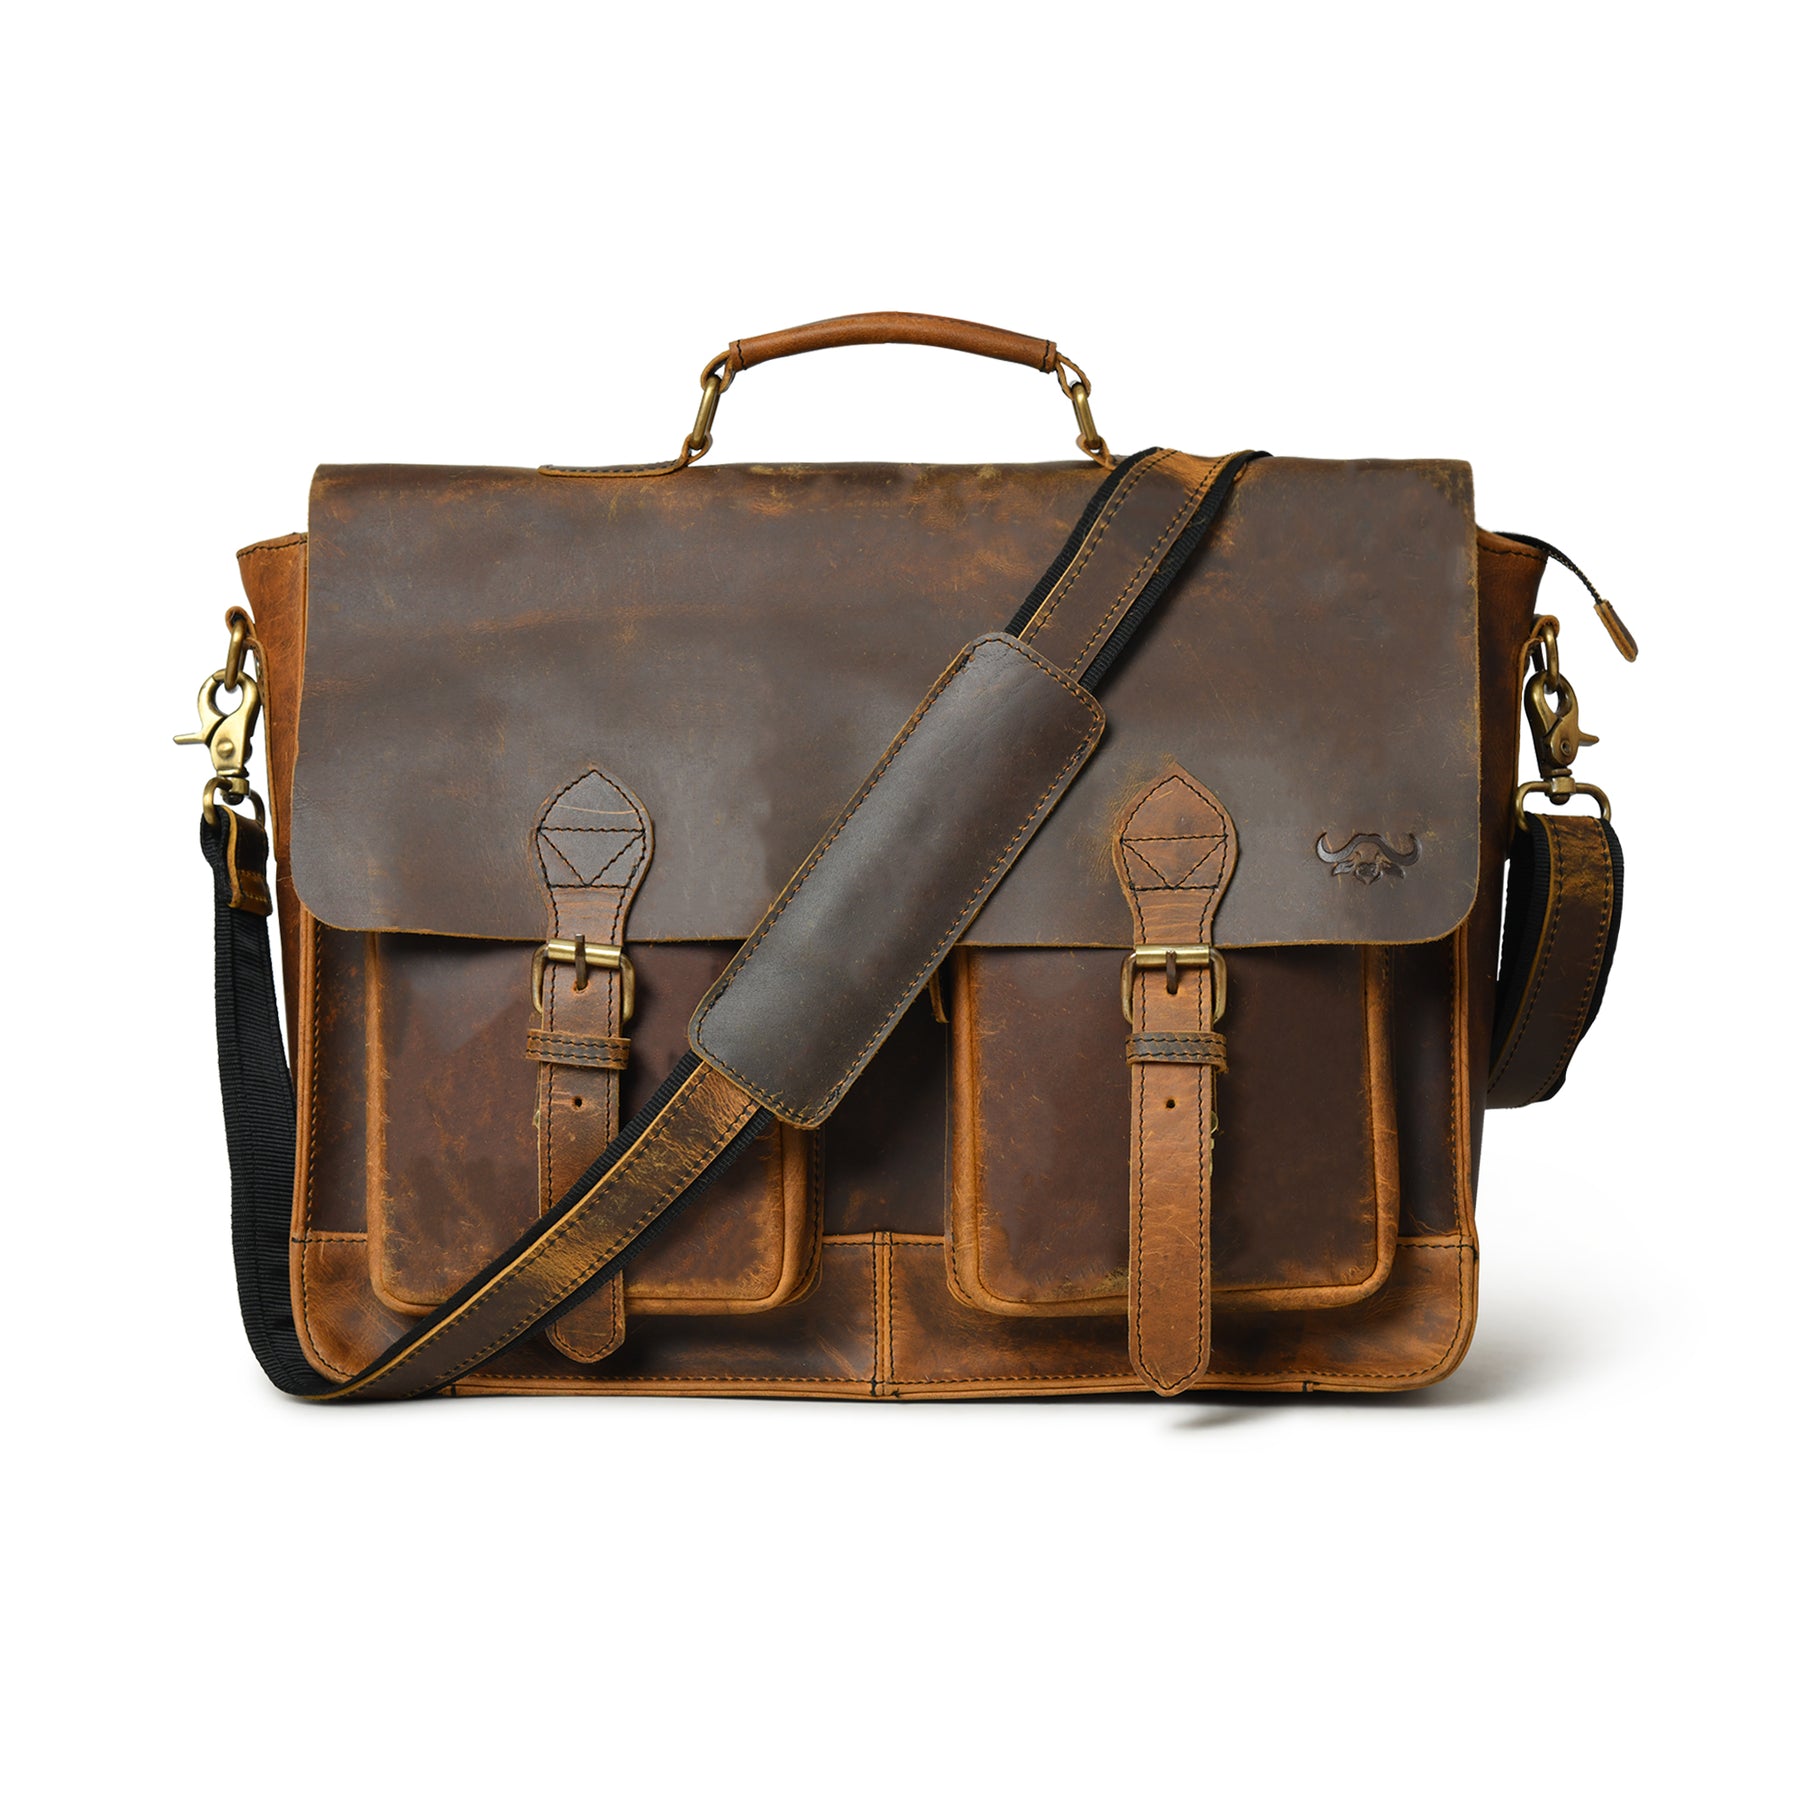 Buy Buffalo Leather Retro Briefcase Online in USA at Lowest Prices ...